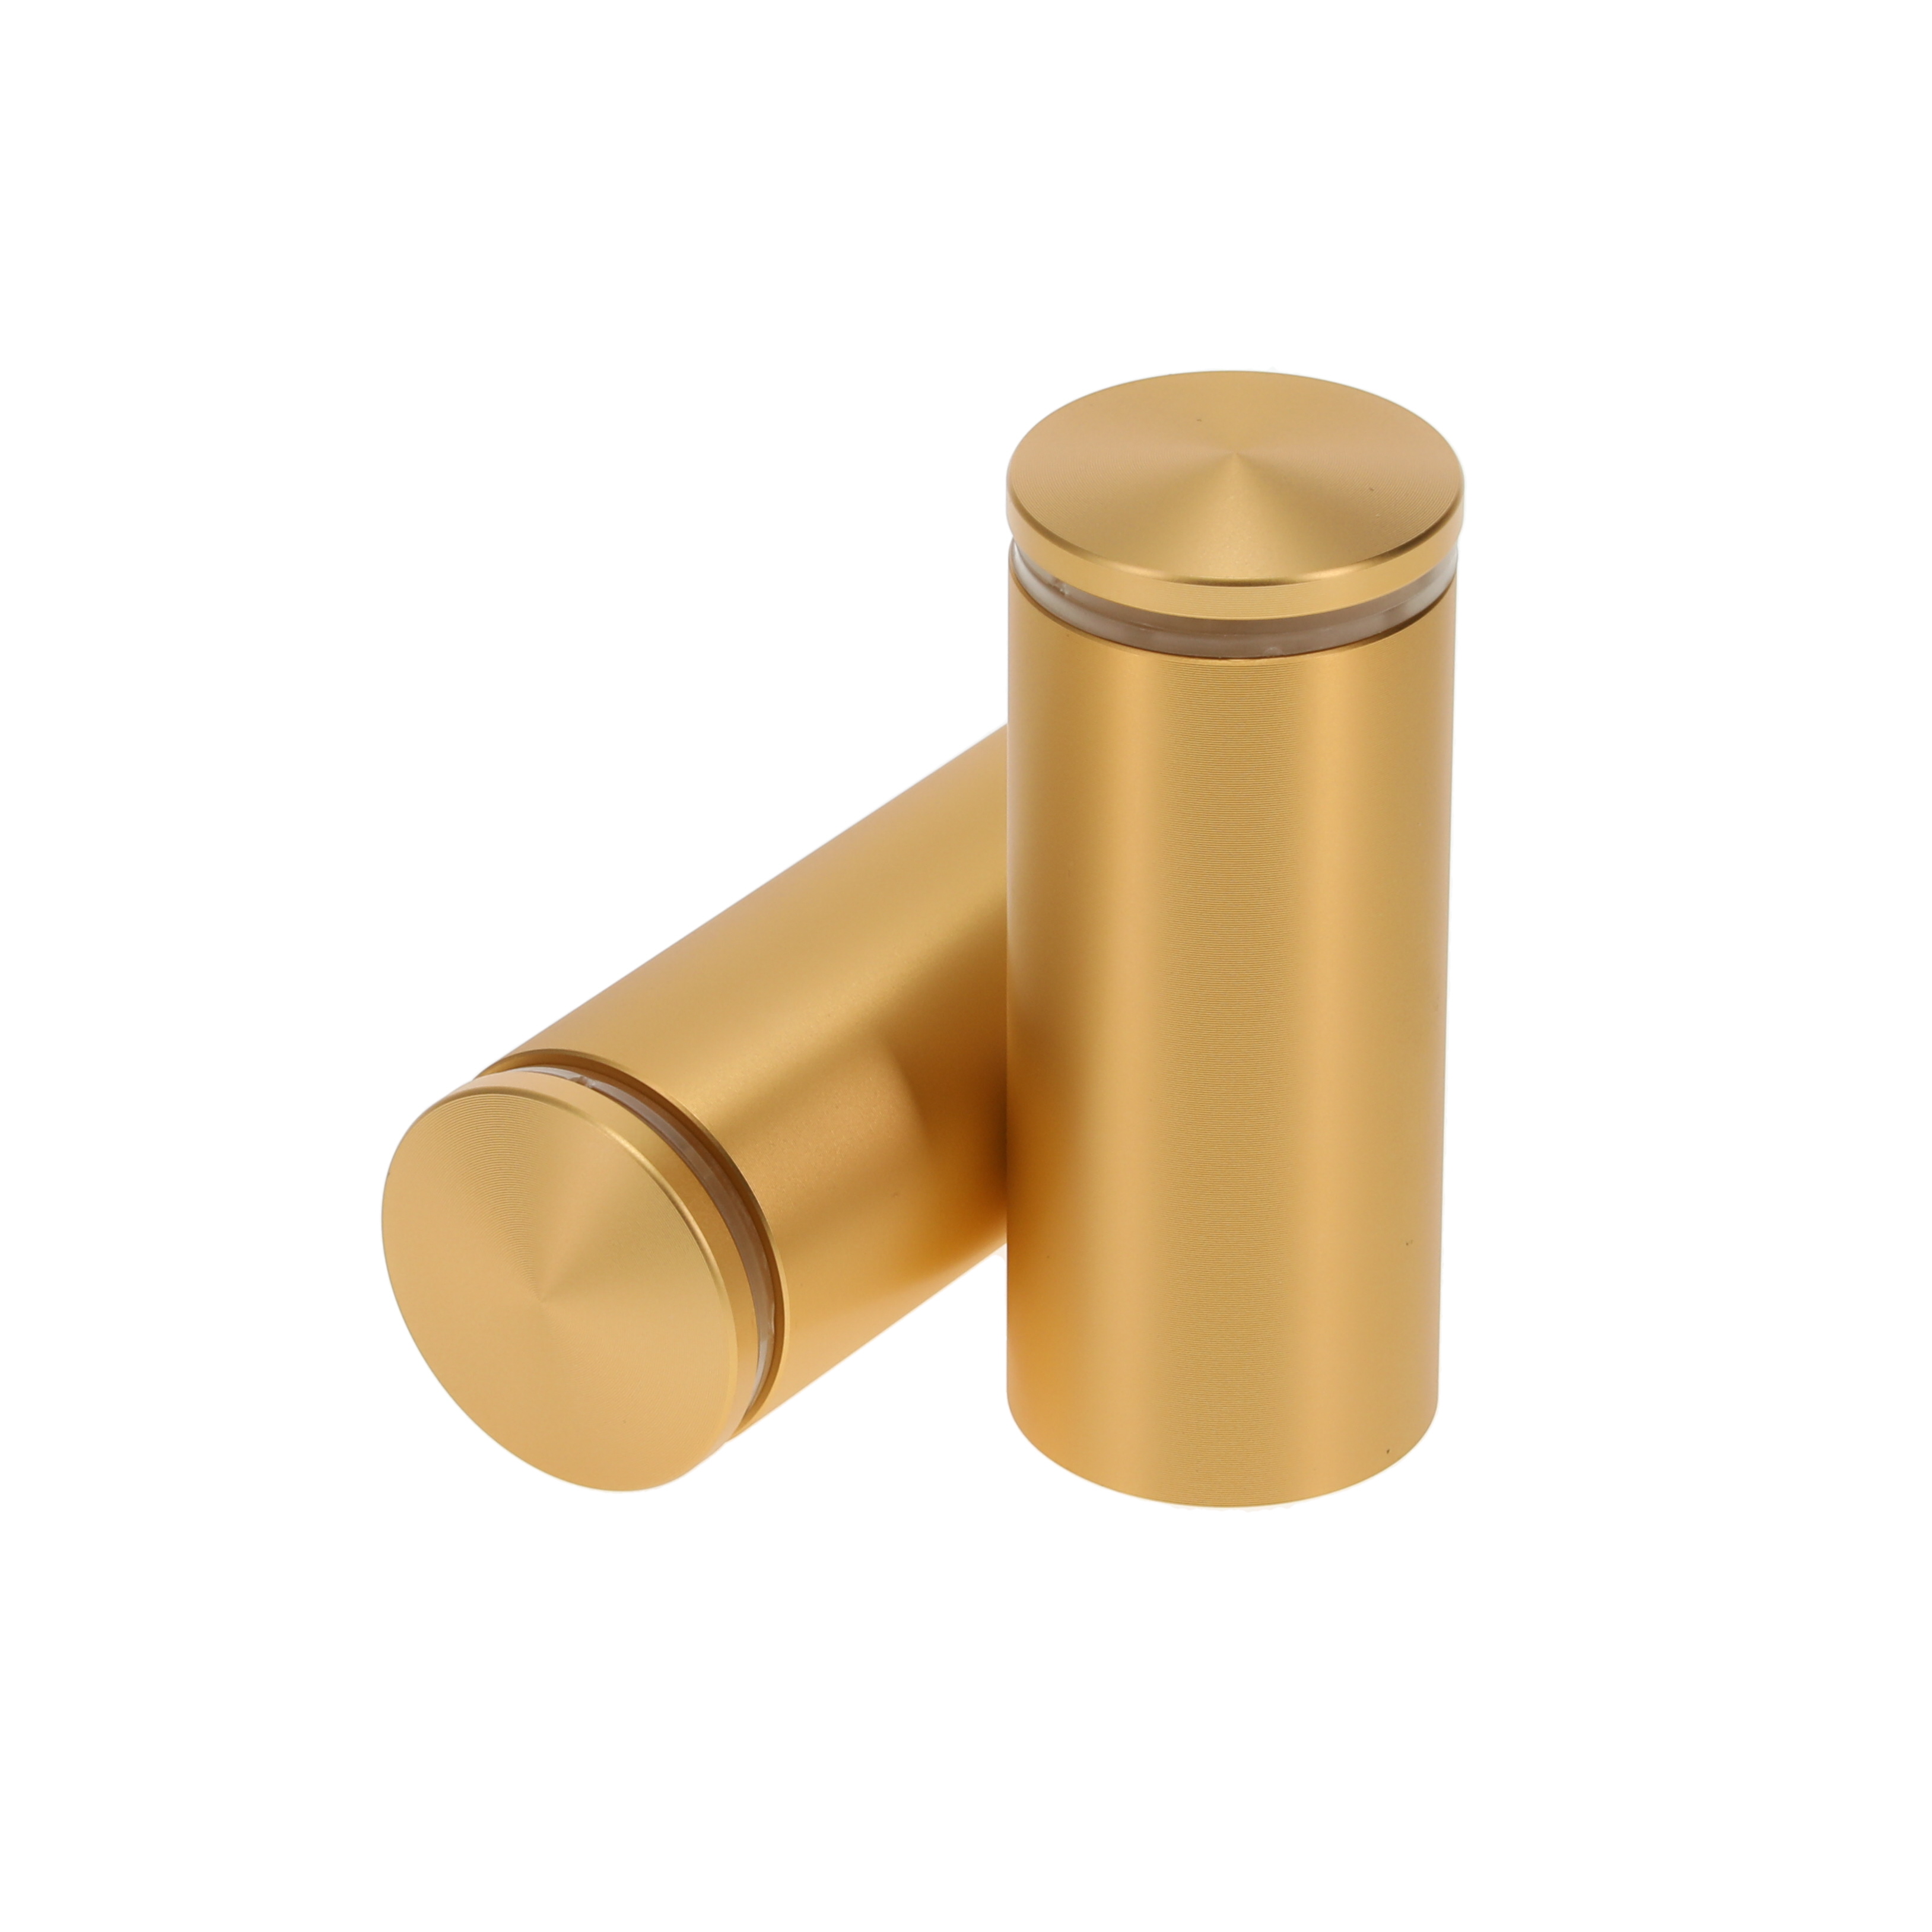 1-1/4'' Diameter X 2-1/2'' Barrel Length, Aluminum Rounded Head Standoffs, Matte Champagne Anodized Finish Easy Fasten Standoff (For Inside / Outside use) [Required Material Hole Size: 7/16'']